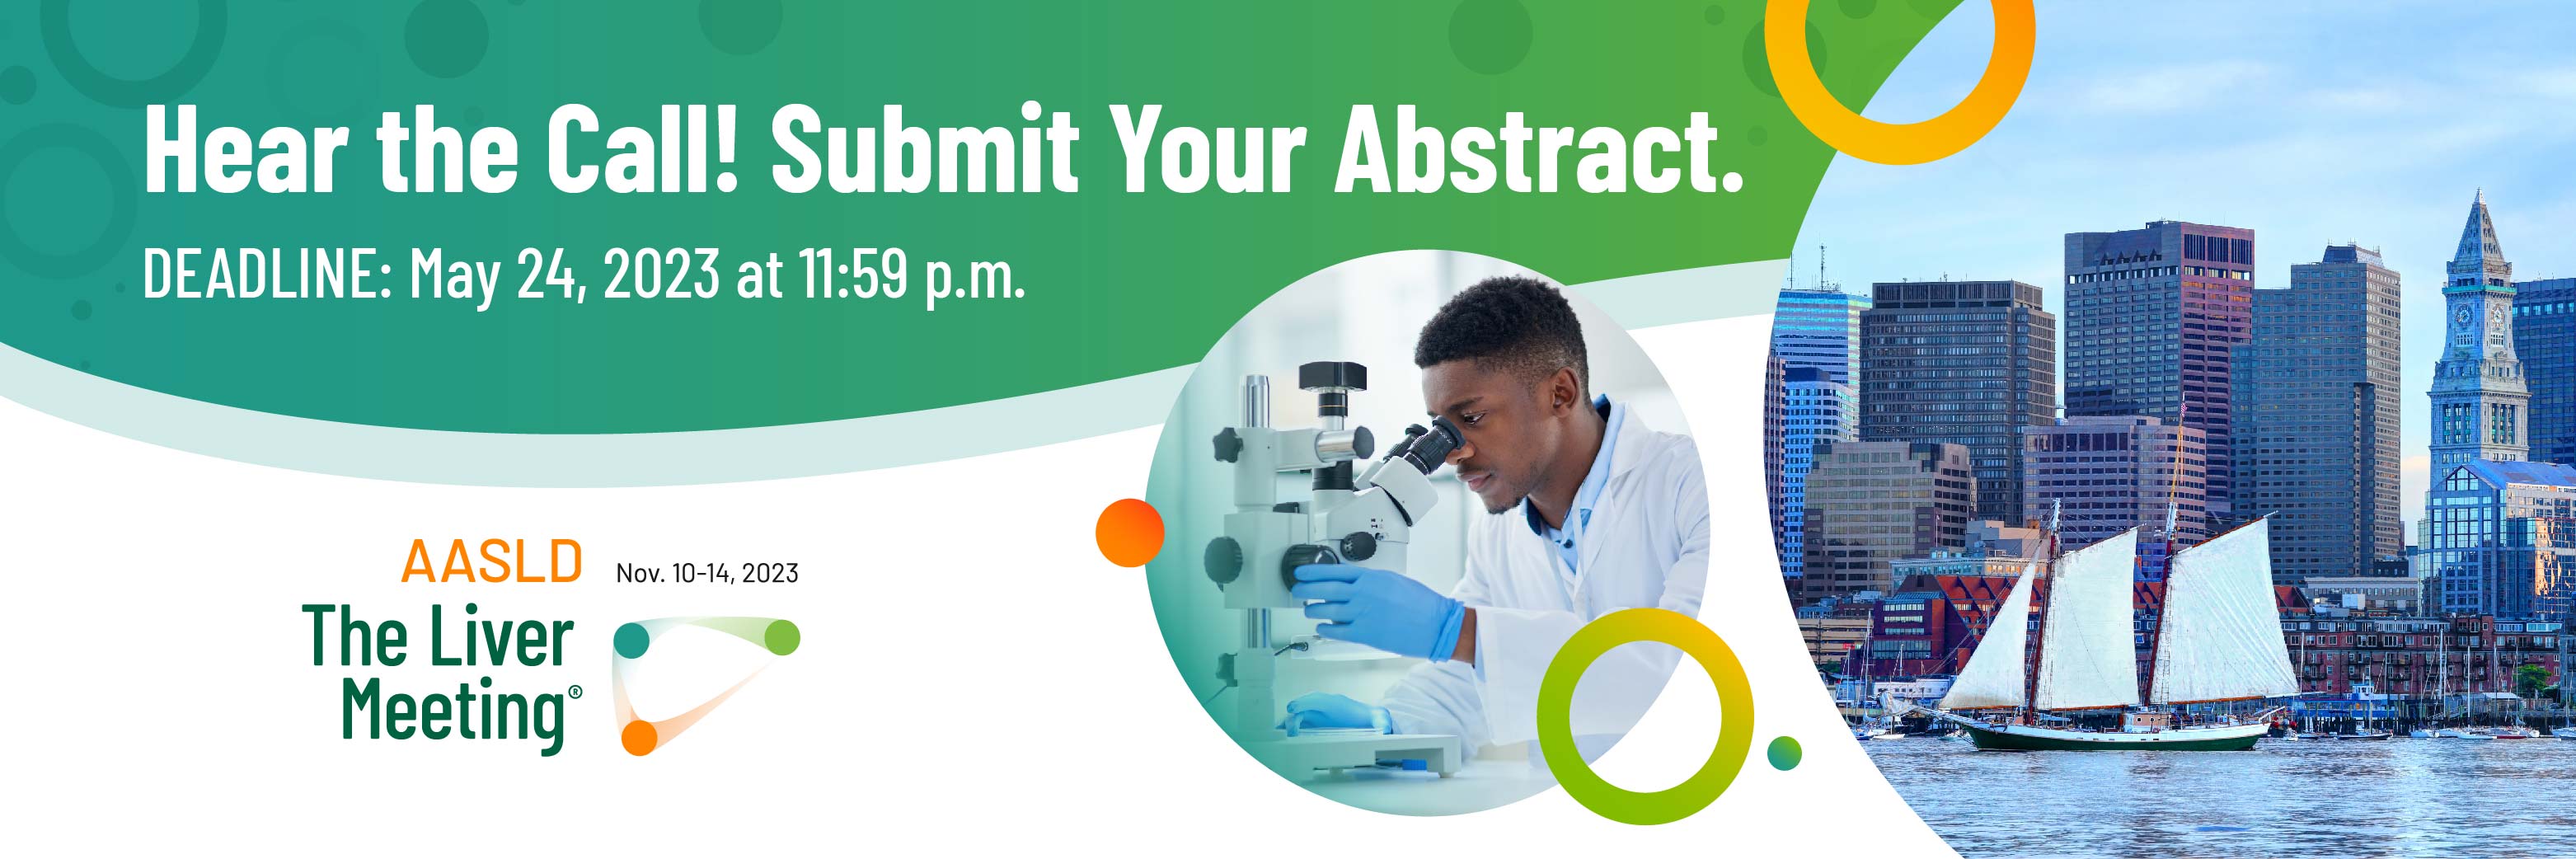 Call for Abstract Submissions for The Liver Meeting 2023